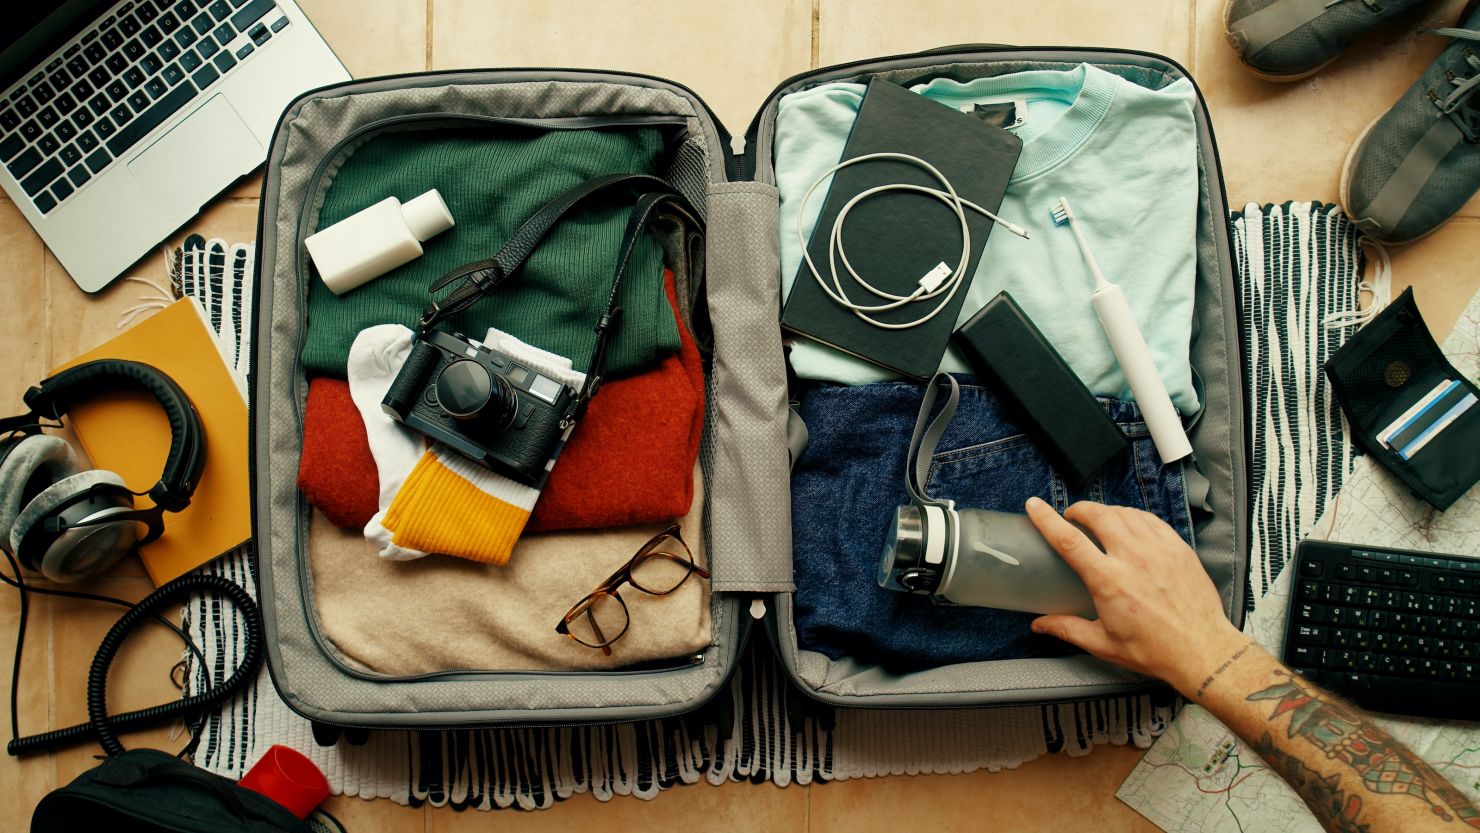 Always pack your things with the most convenient way as tidy as